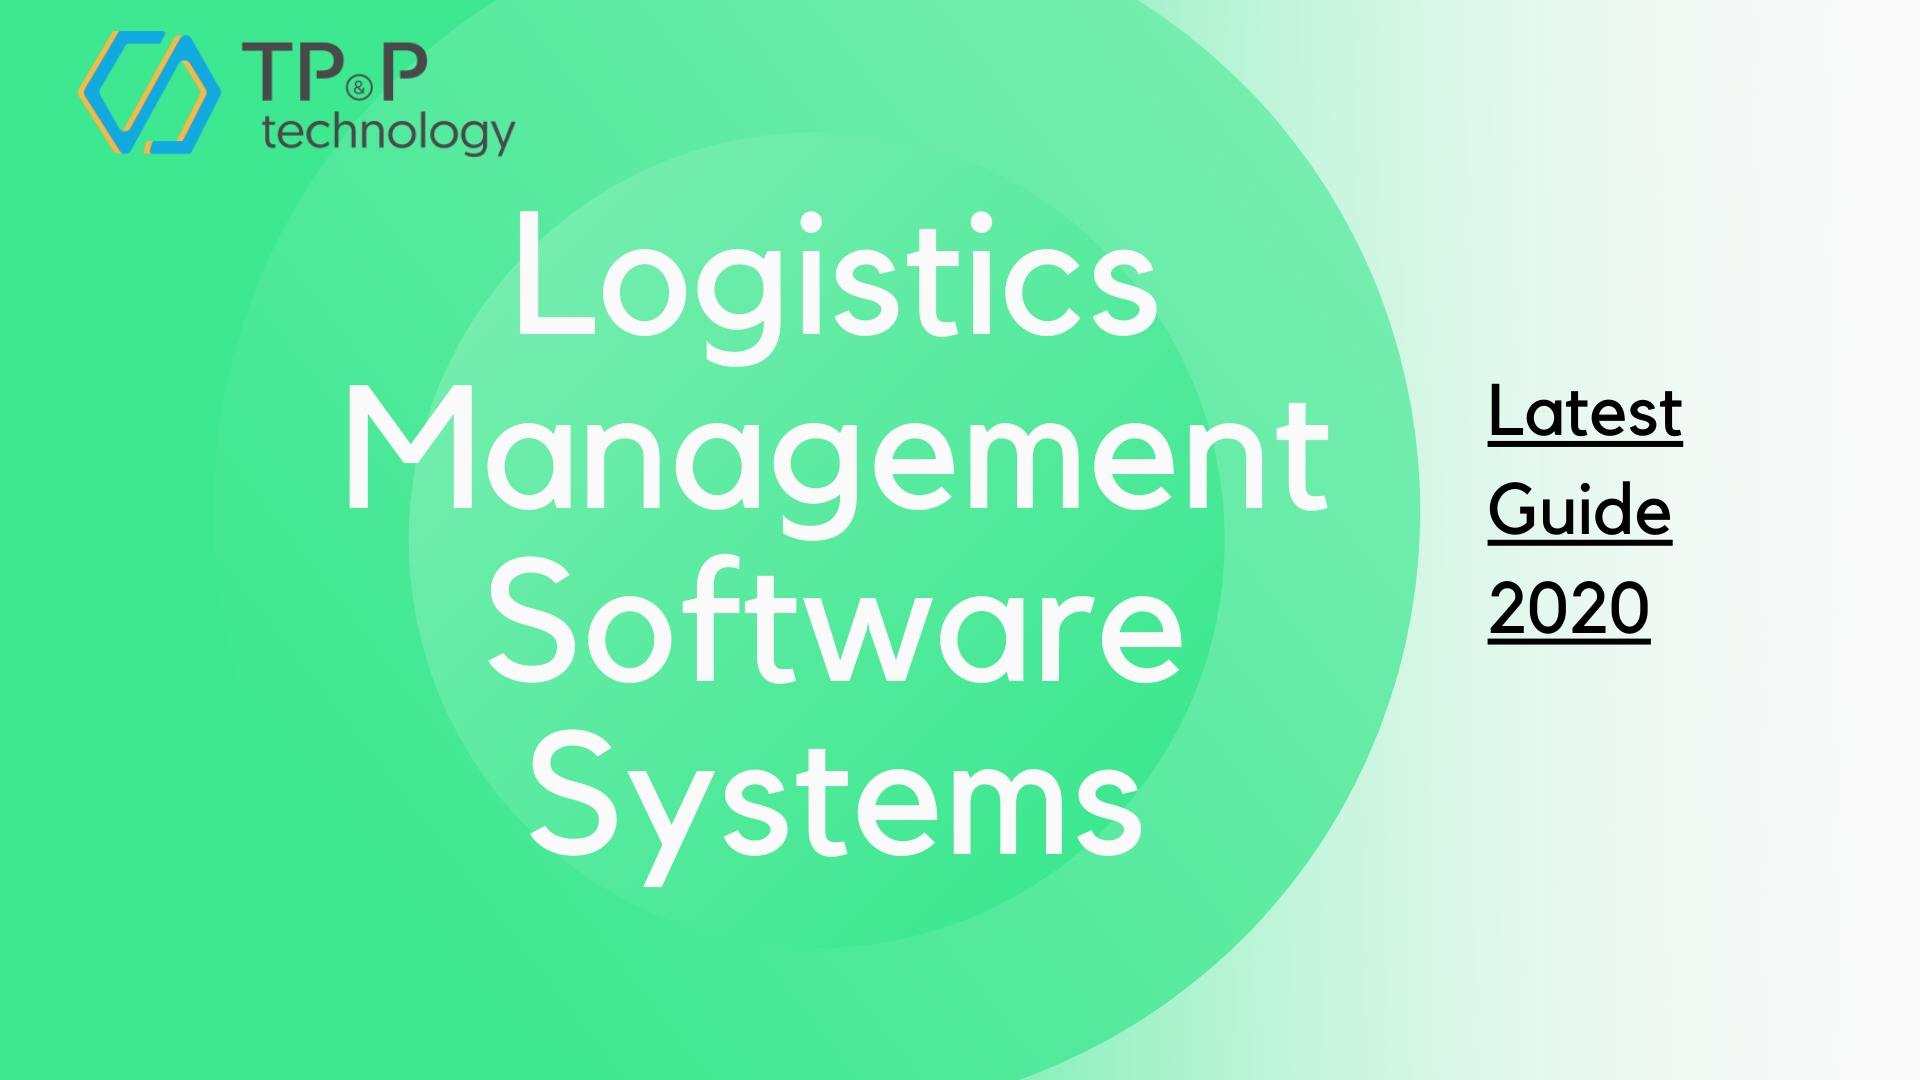 Logistics Management Software Systems Development: How Does It Work? Latest Guideline 2020